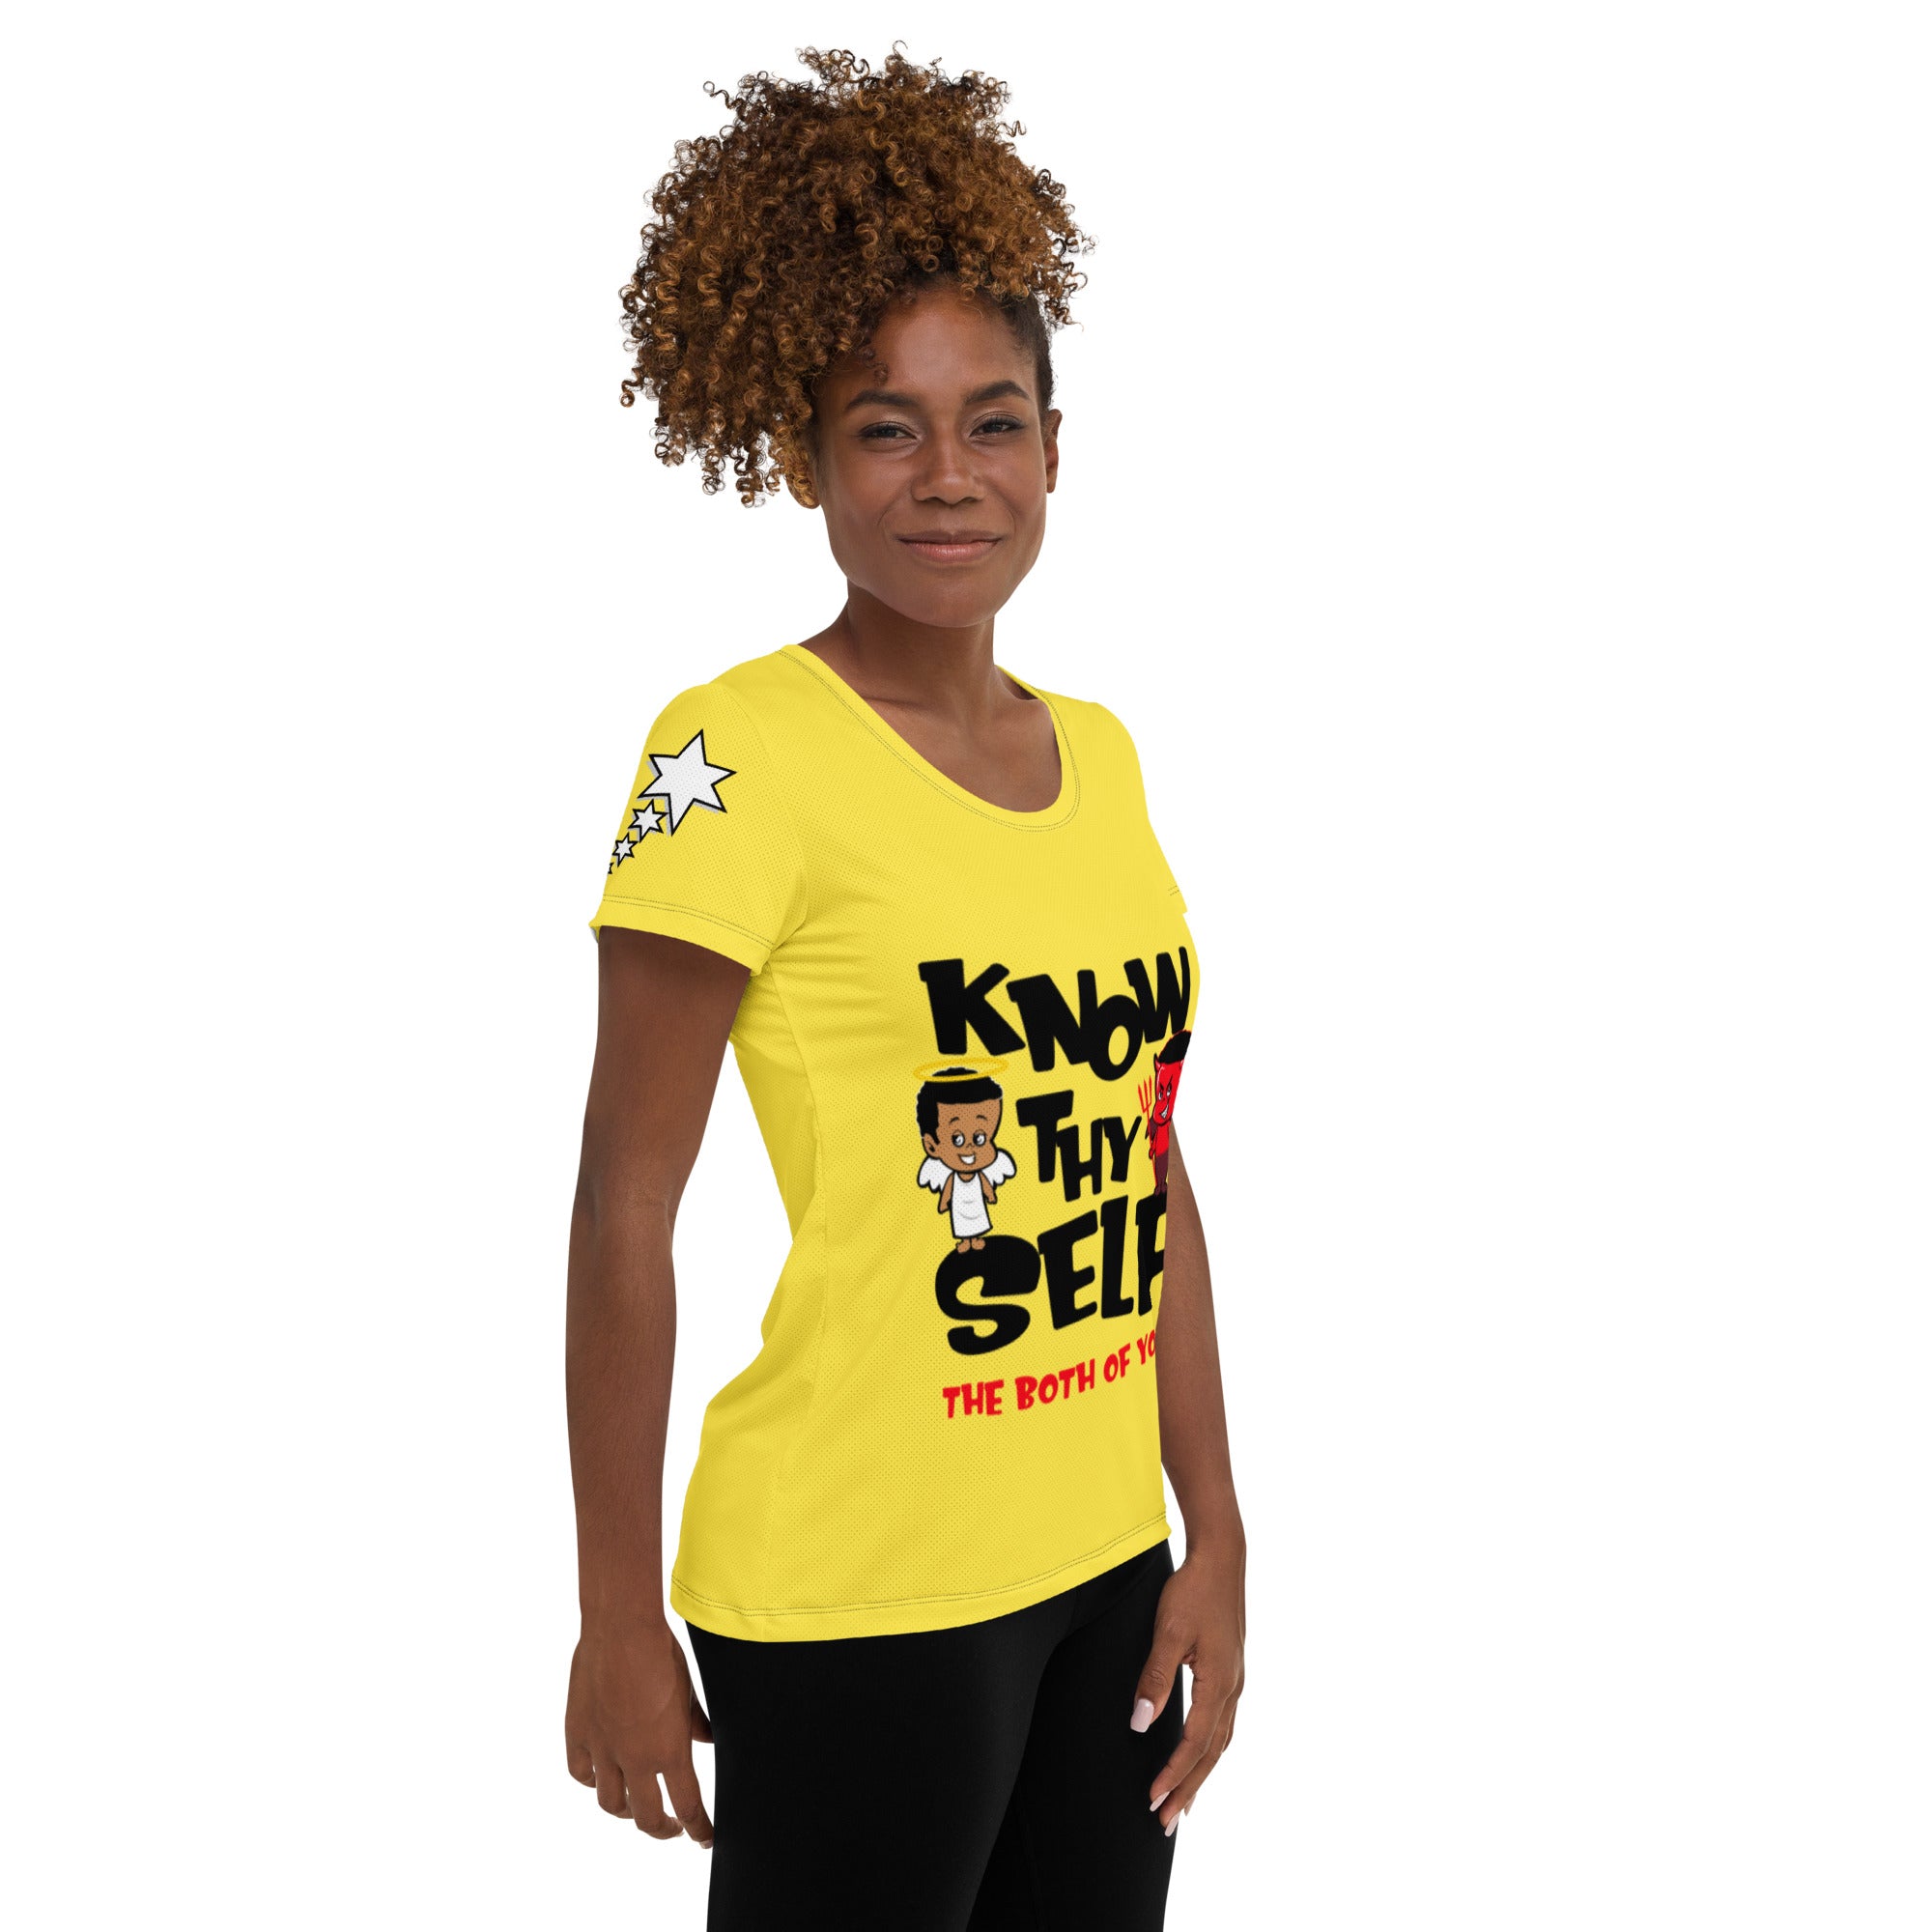 Know Thyself - All-Over Print Women's Athletic T-shirt